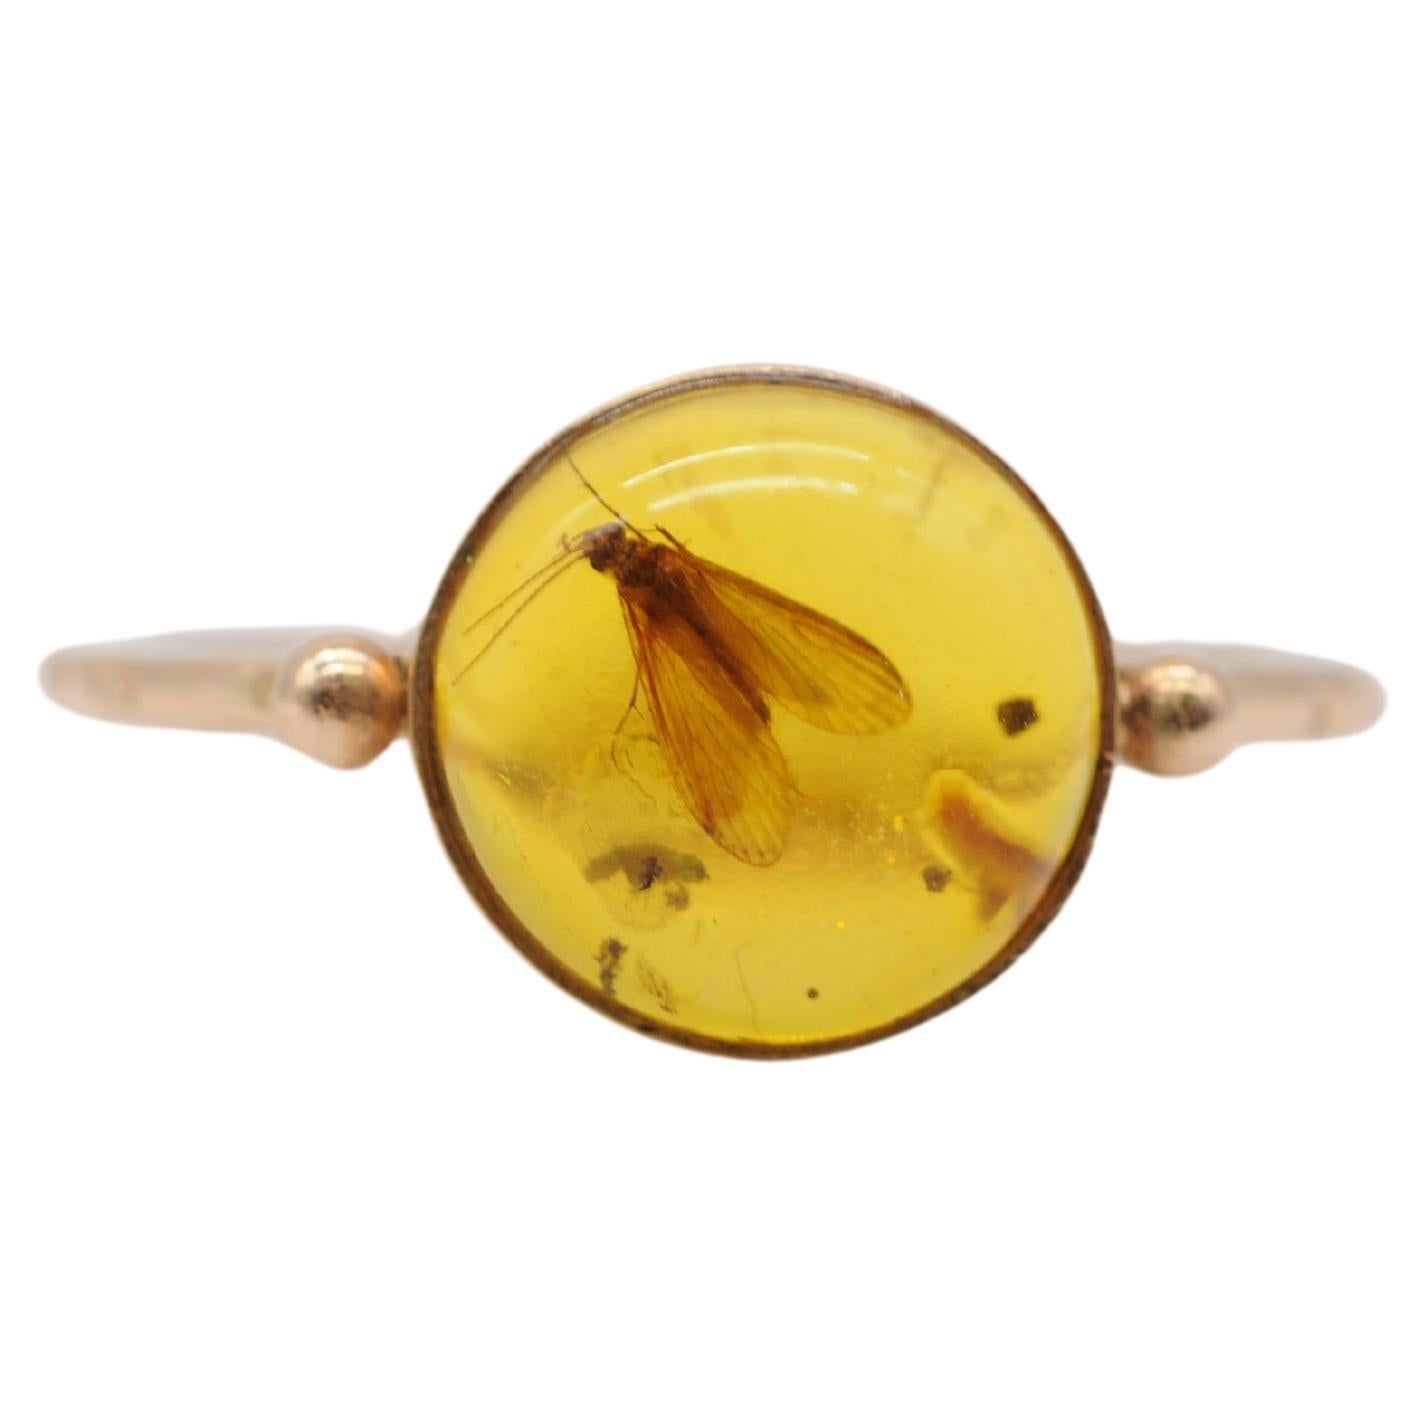 wonderful amber ring with insect included